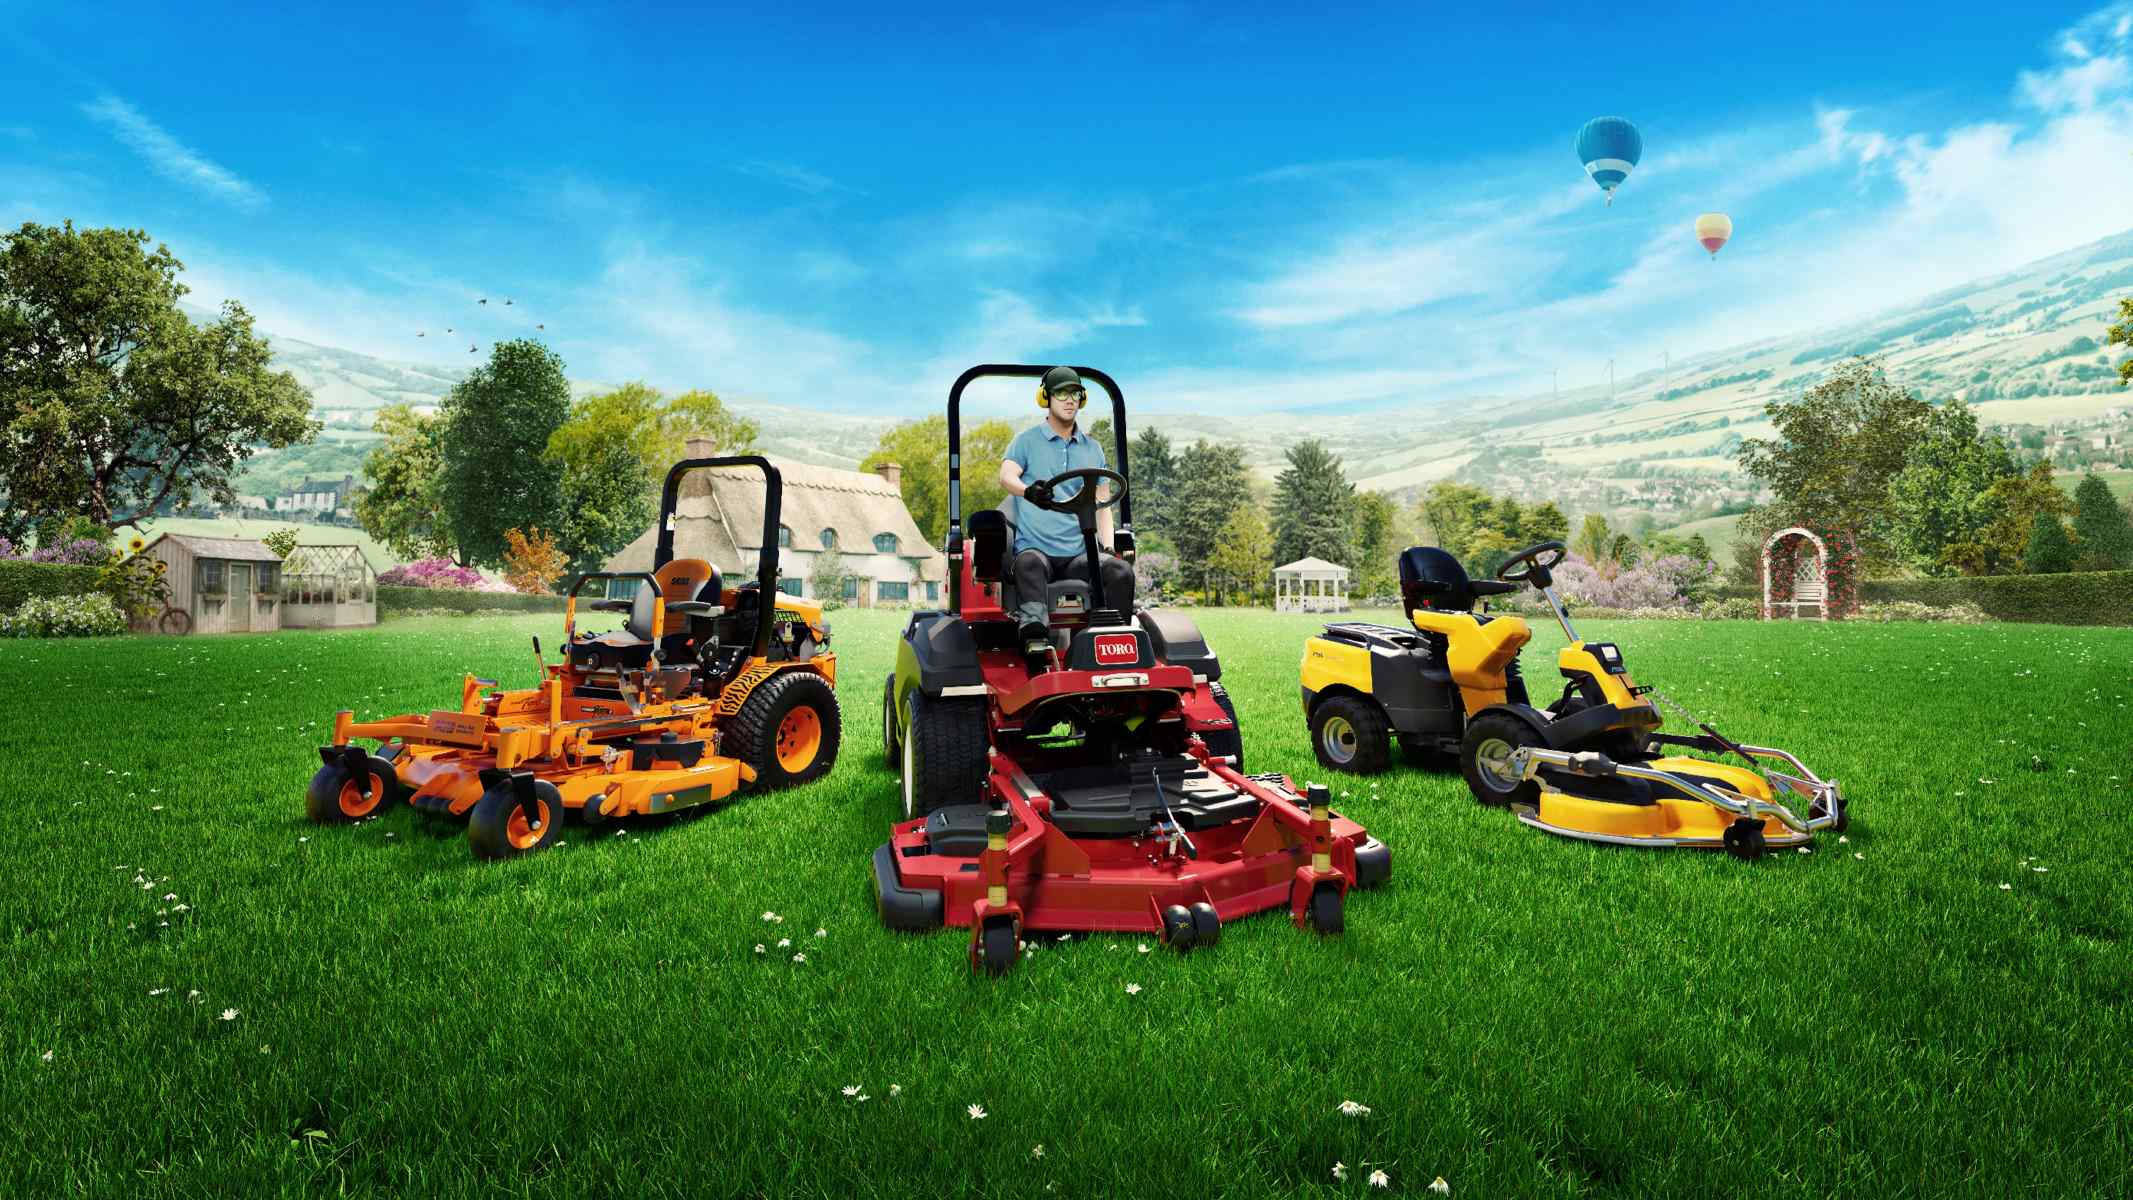 19-lawn-mower-facts